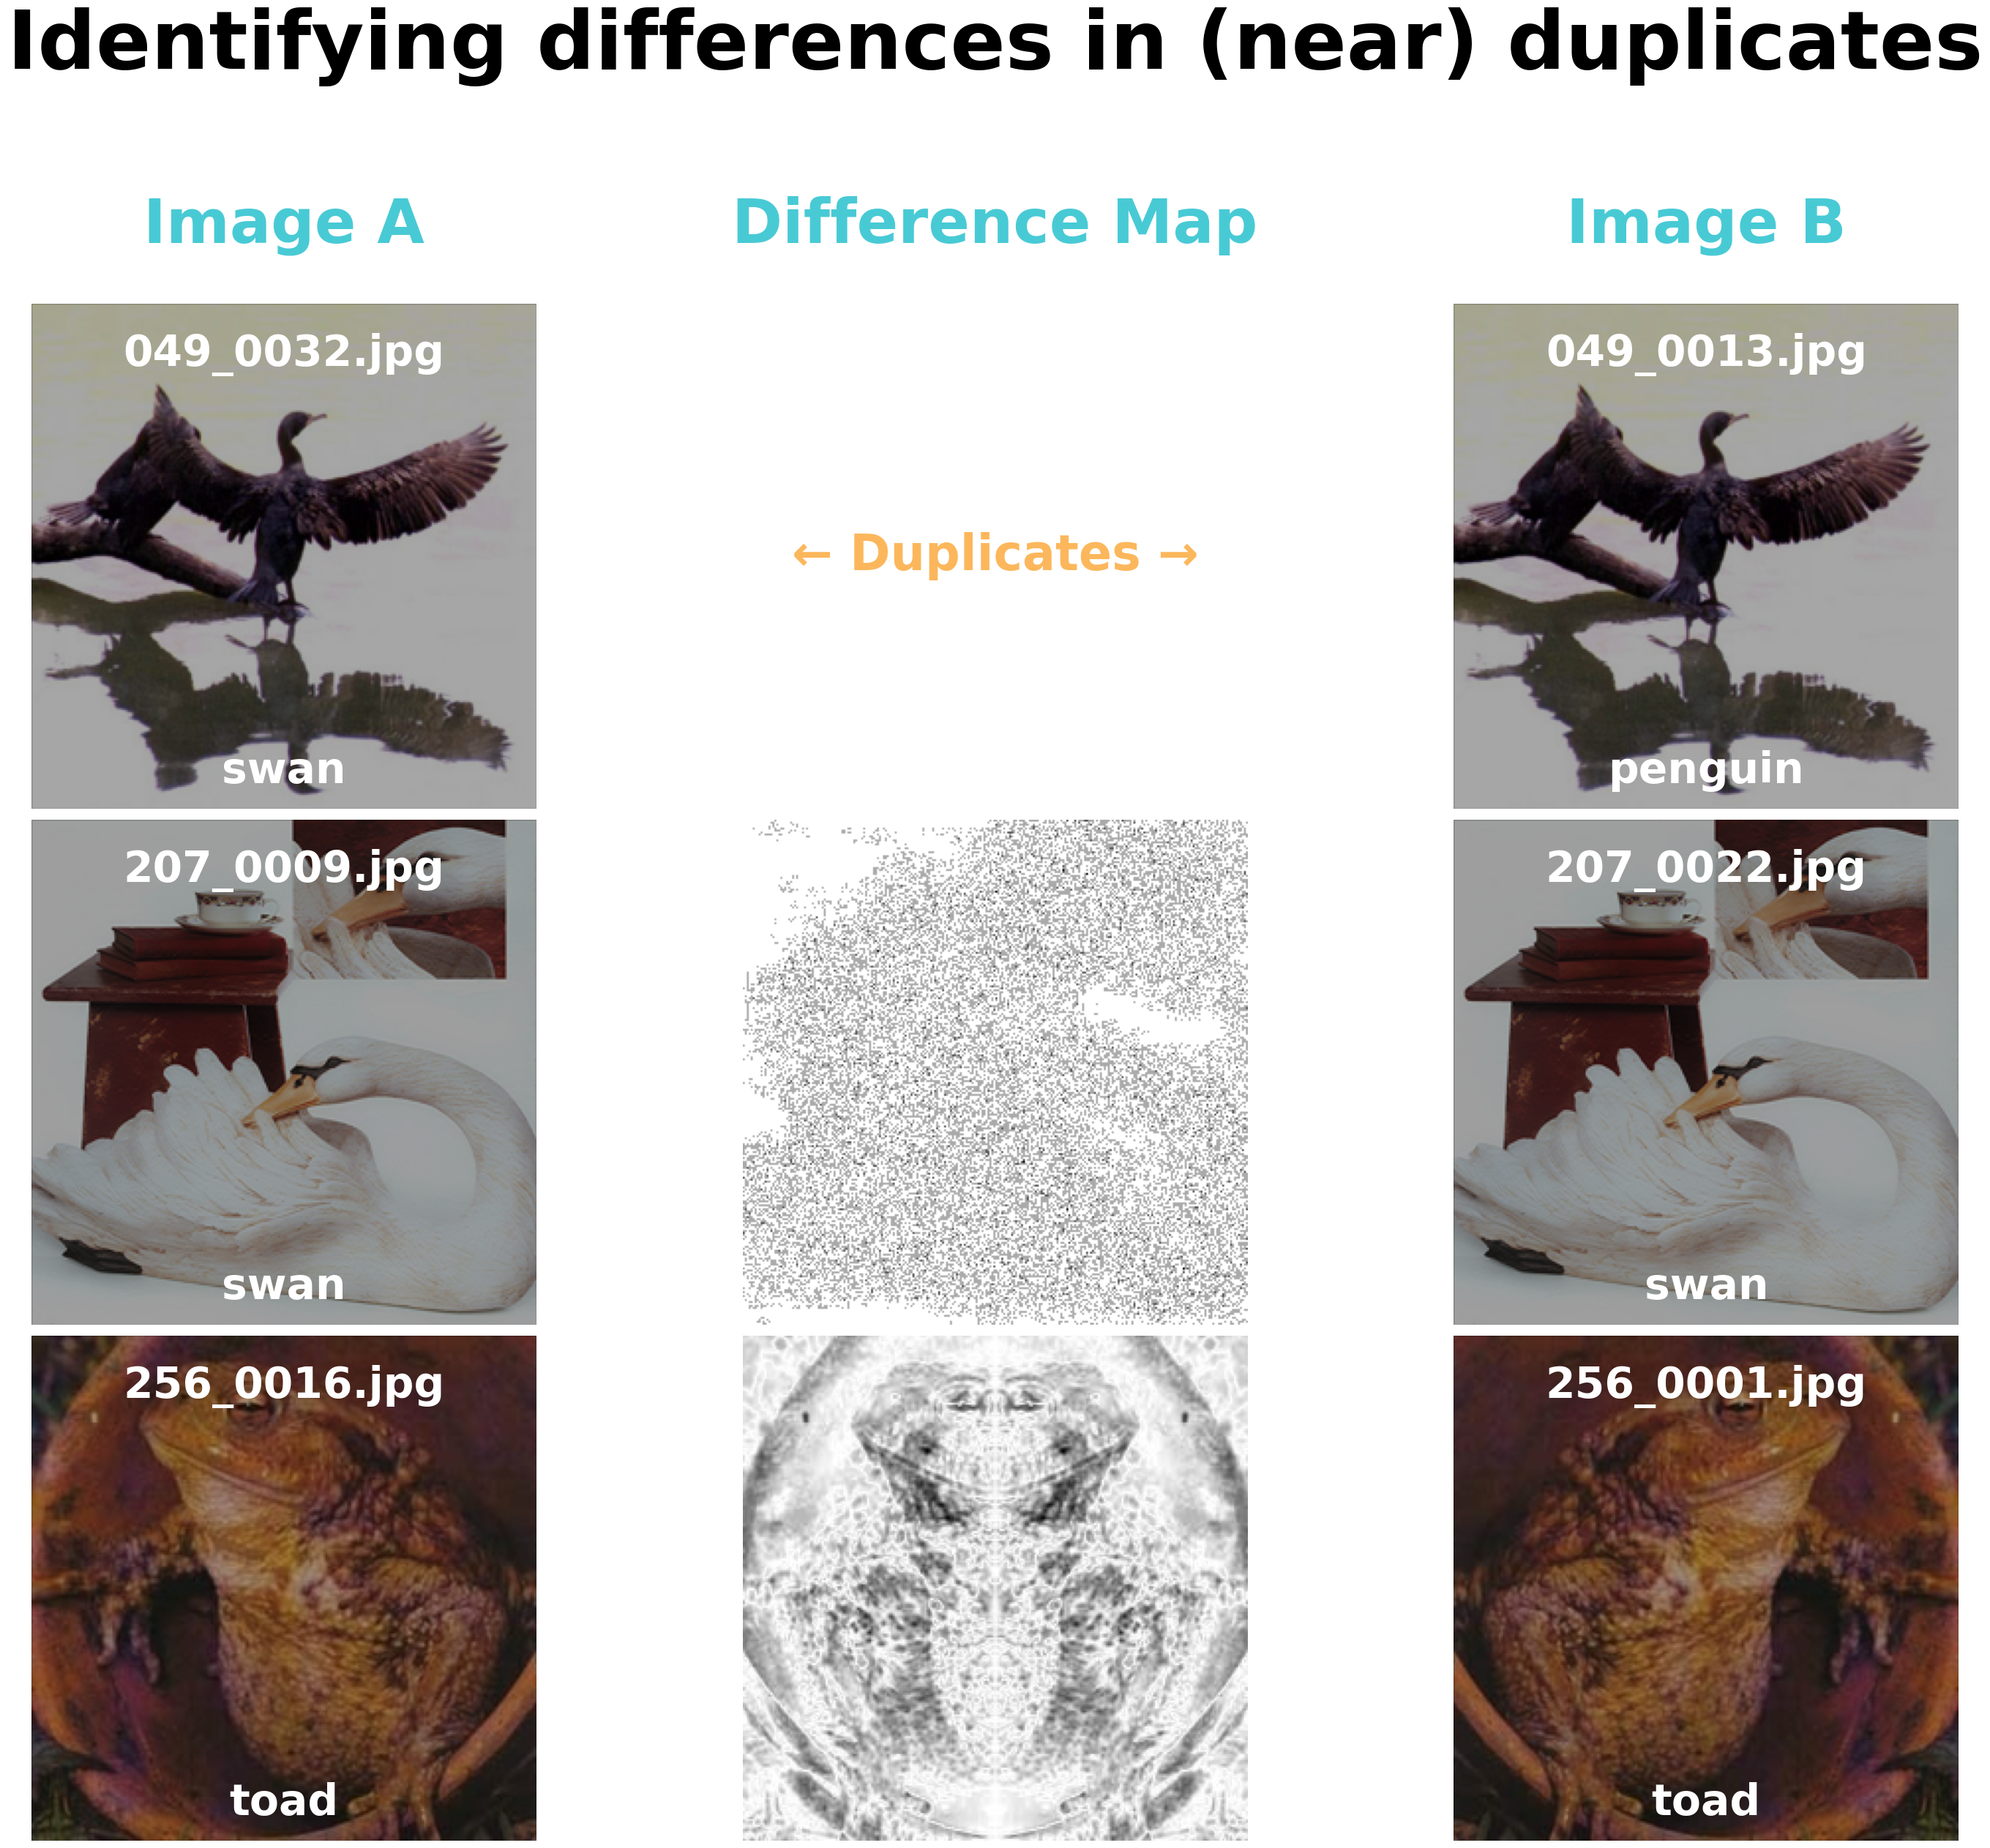 Near duplicates detected by Datalab in our dataset